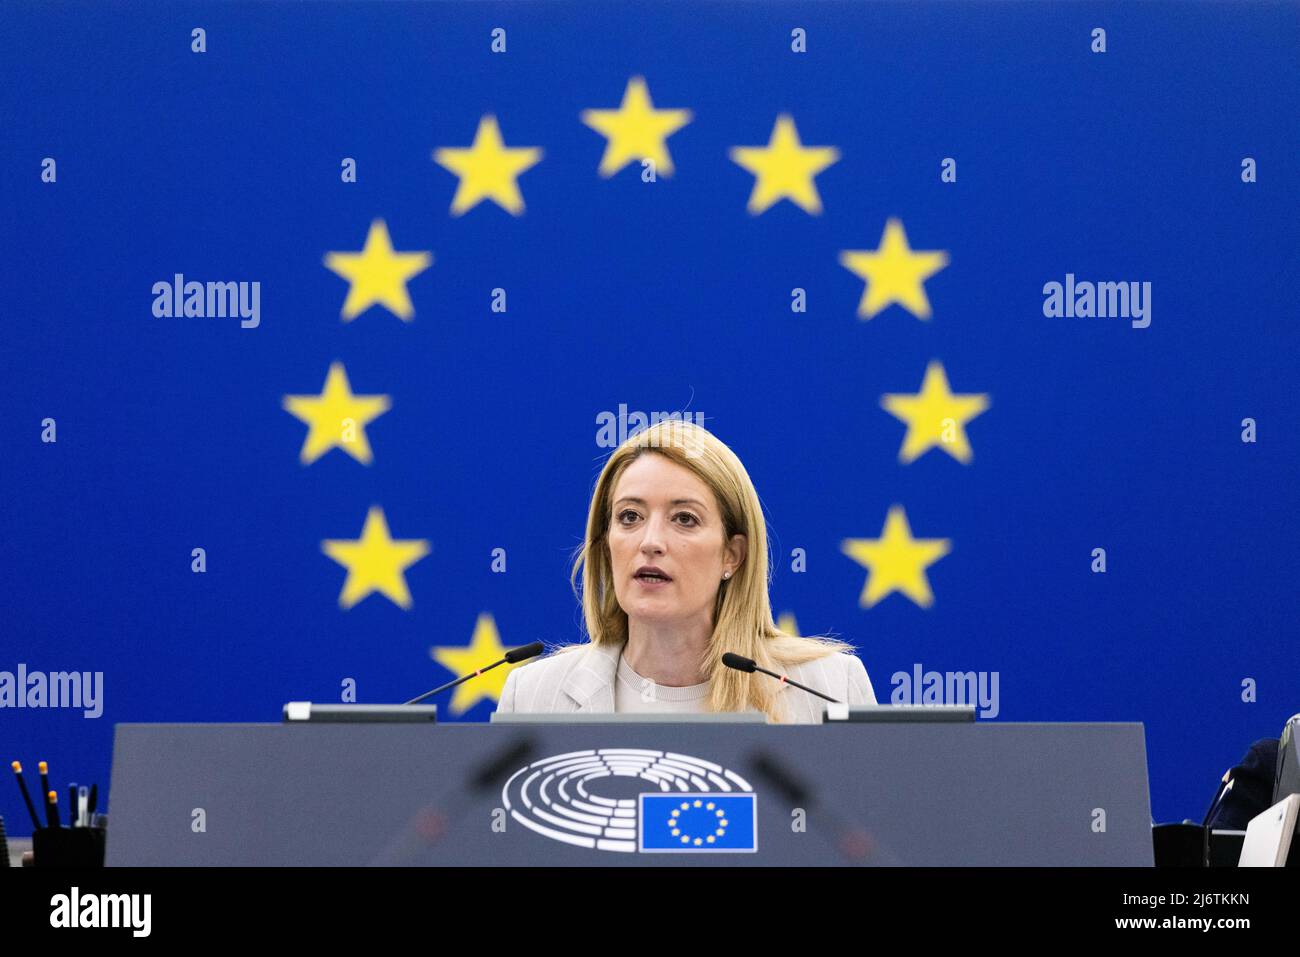 04 May 2022, France, Straßburg: Roberta Metsola (Partit Nazzjonalista), President of the European Parliament, sits during a plenary session in the European Parliament building. In the EU Parliament, the main topic of discussion is Ukraine. Expected is the presentation of a sixth package of sanctions, which includes the exit from Russian oil. Photo: Philipp von Ditfurth/dpa Stock Photo